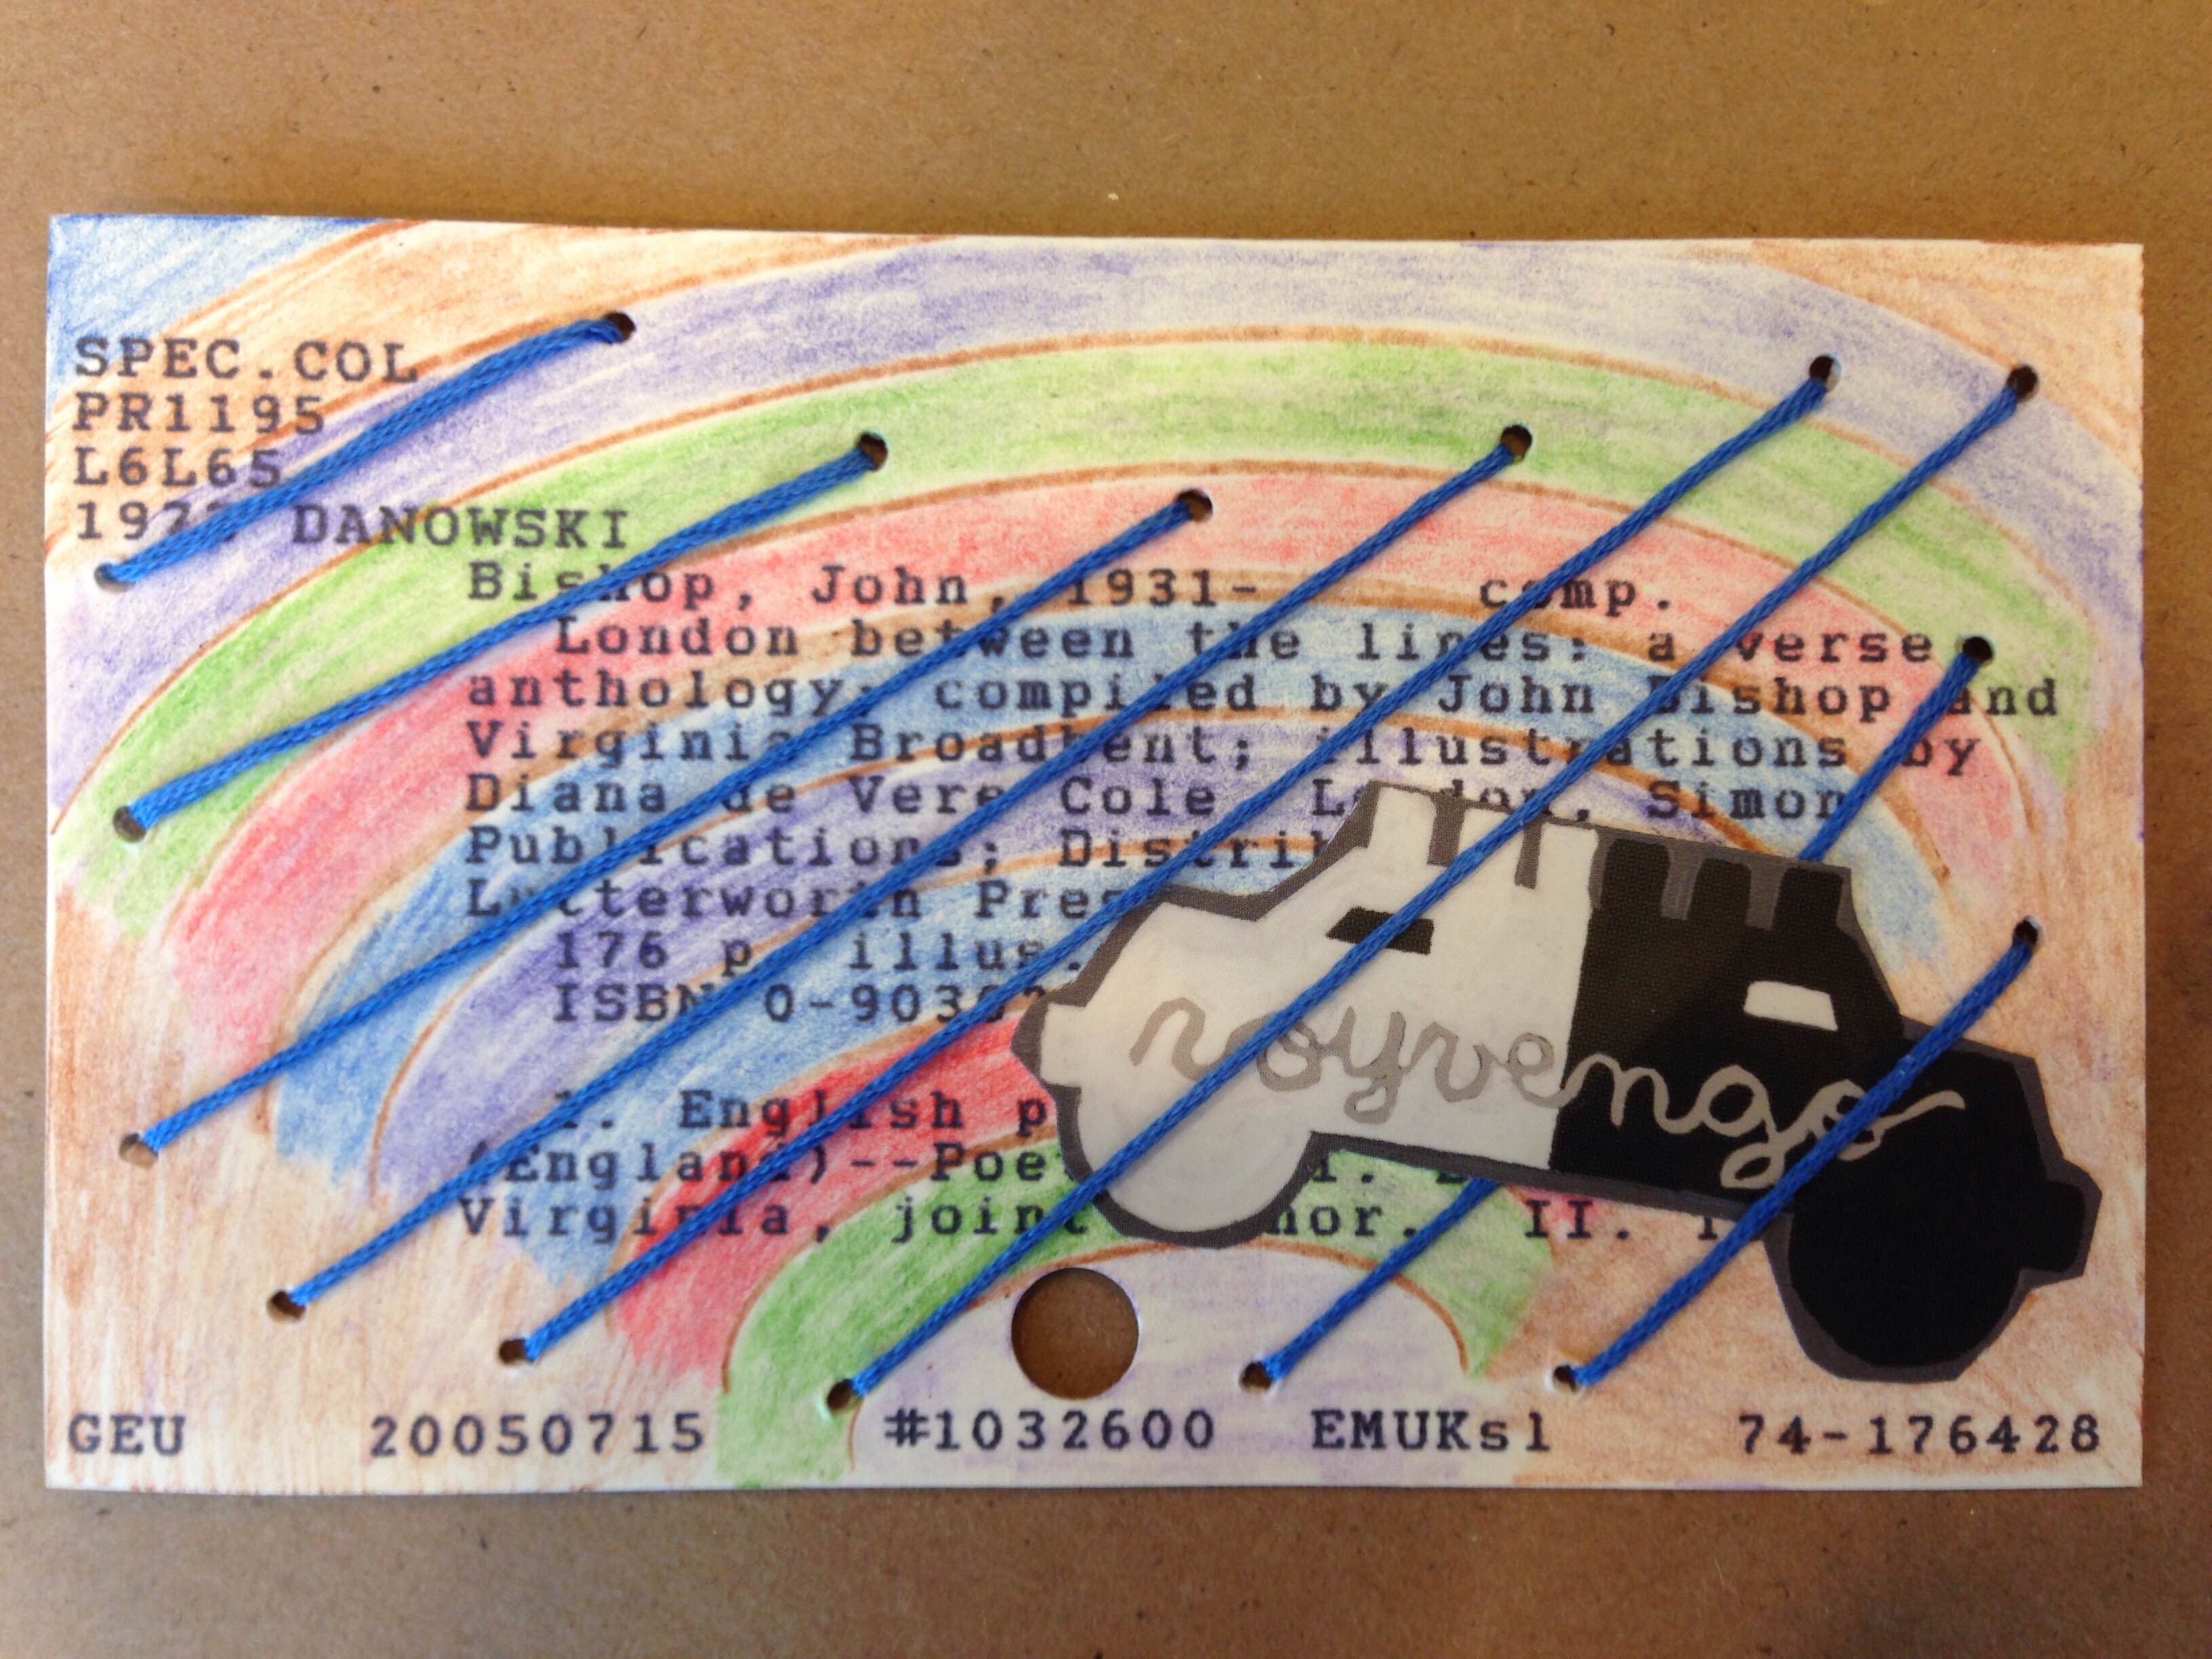 Card catalog card decorated with colored pencil in elliptical lines and blue embroidery thread in diagonal lines across the card. There is also a cut out illustrated car tucked between the thread.